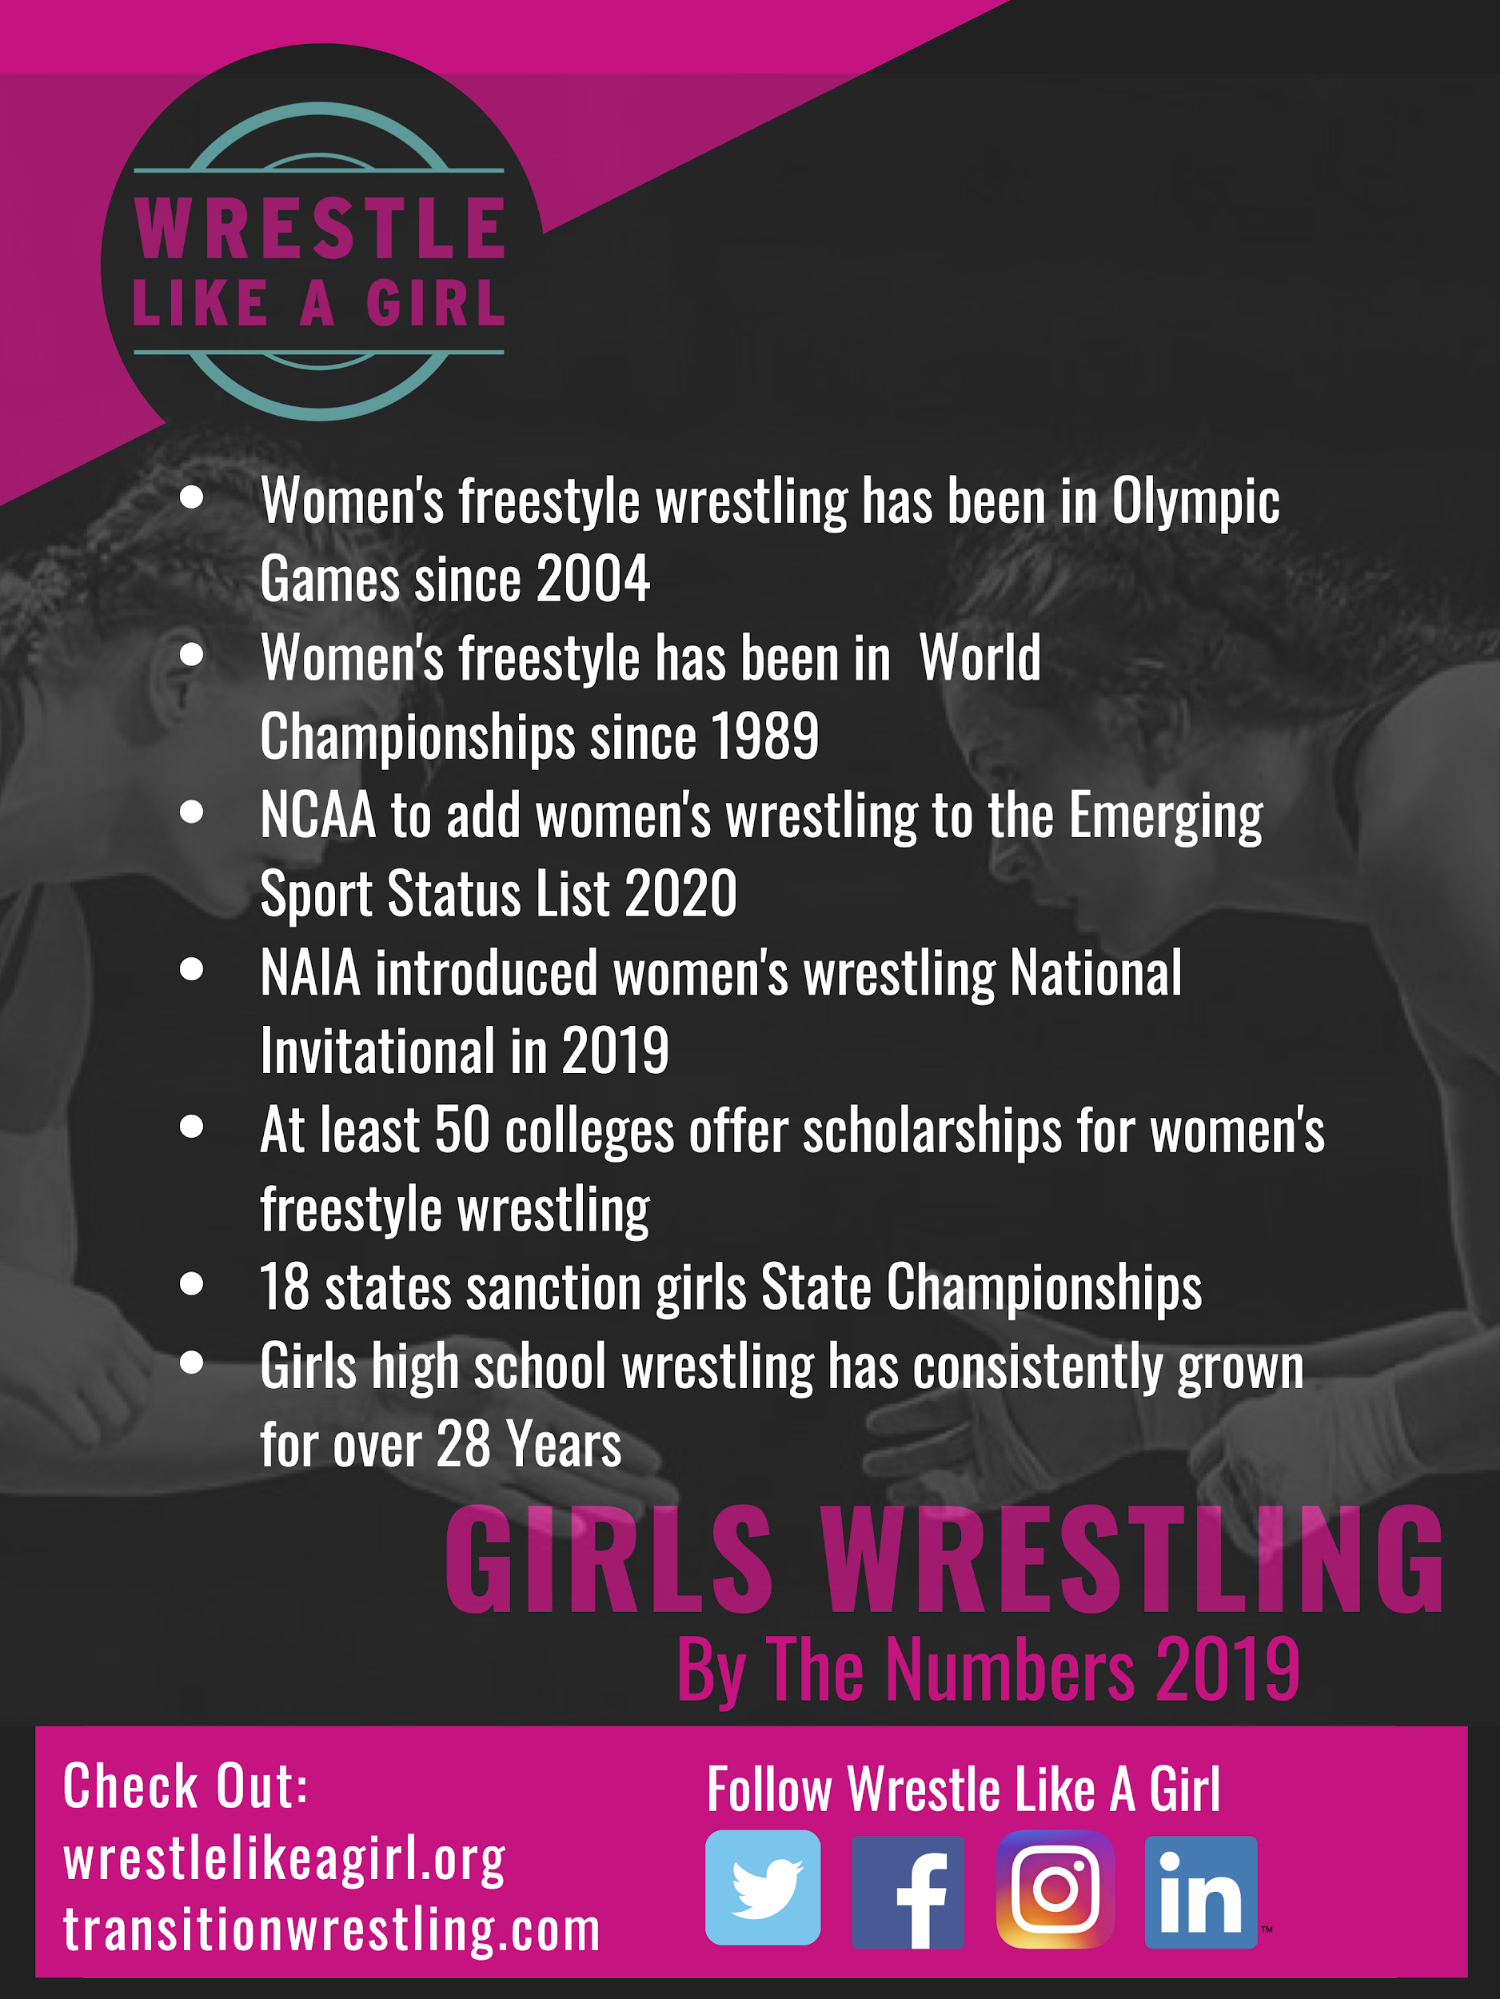 Girls wrestling by the numbers